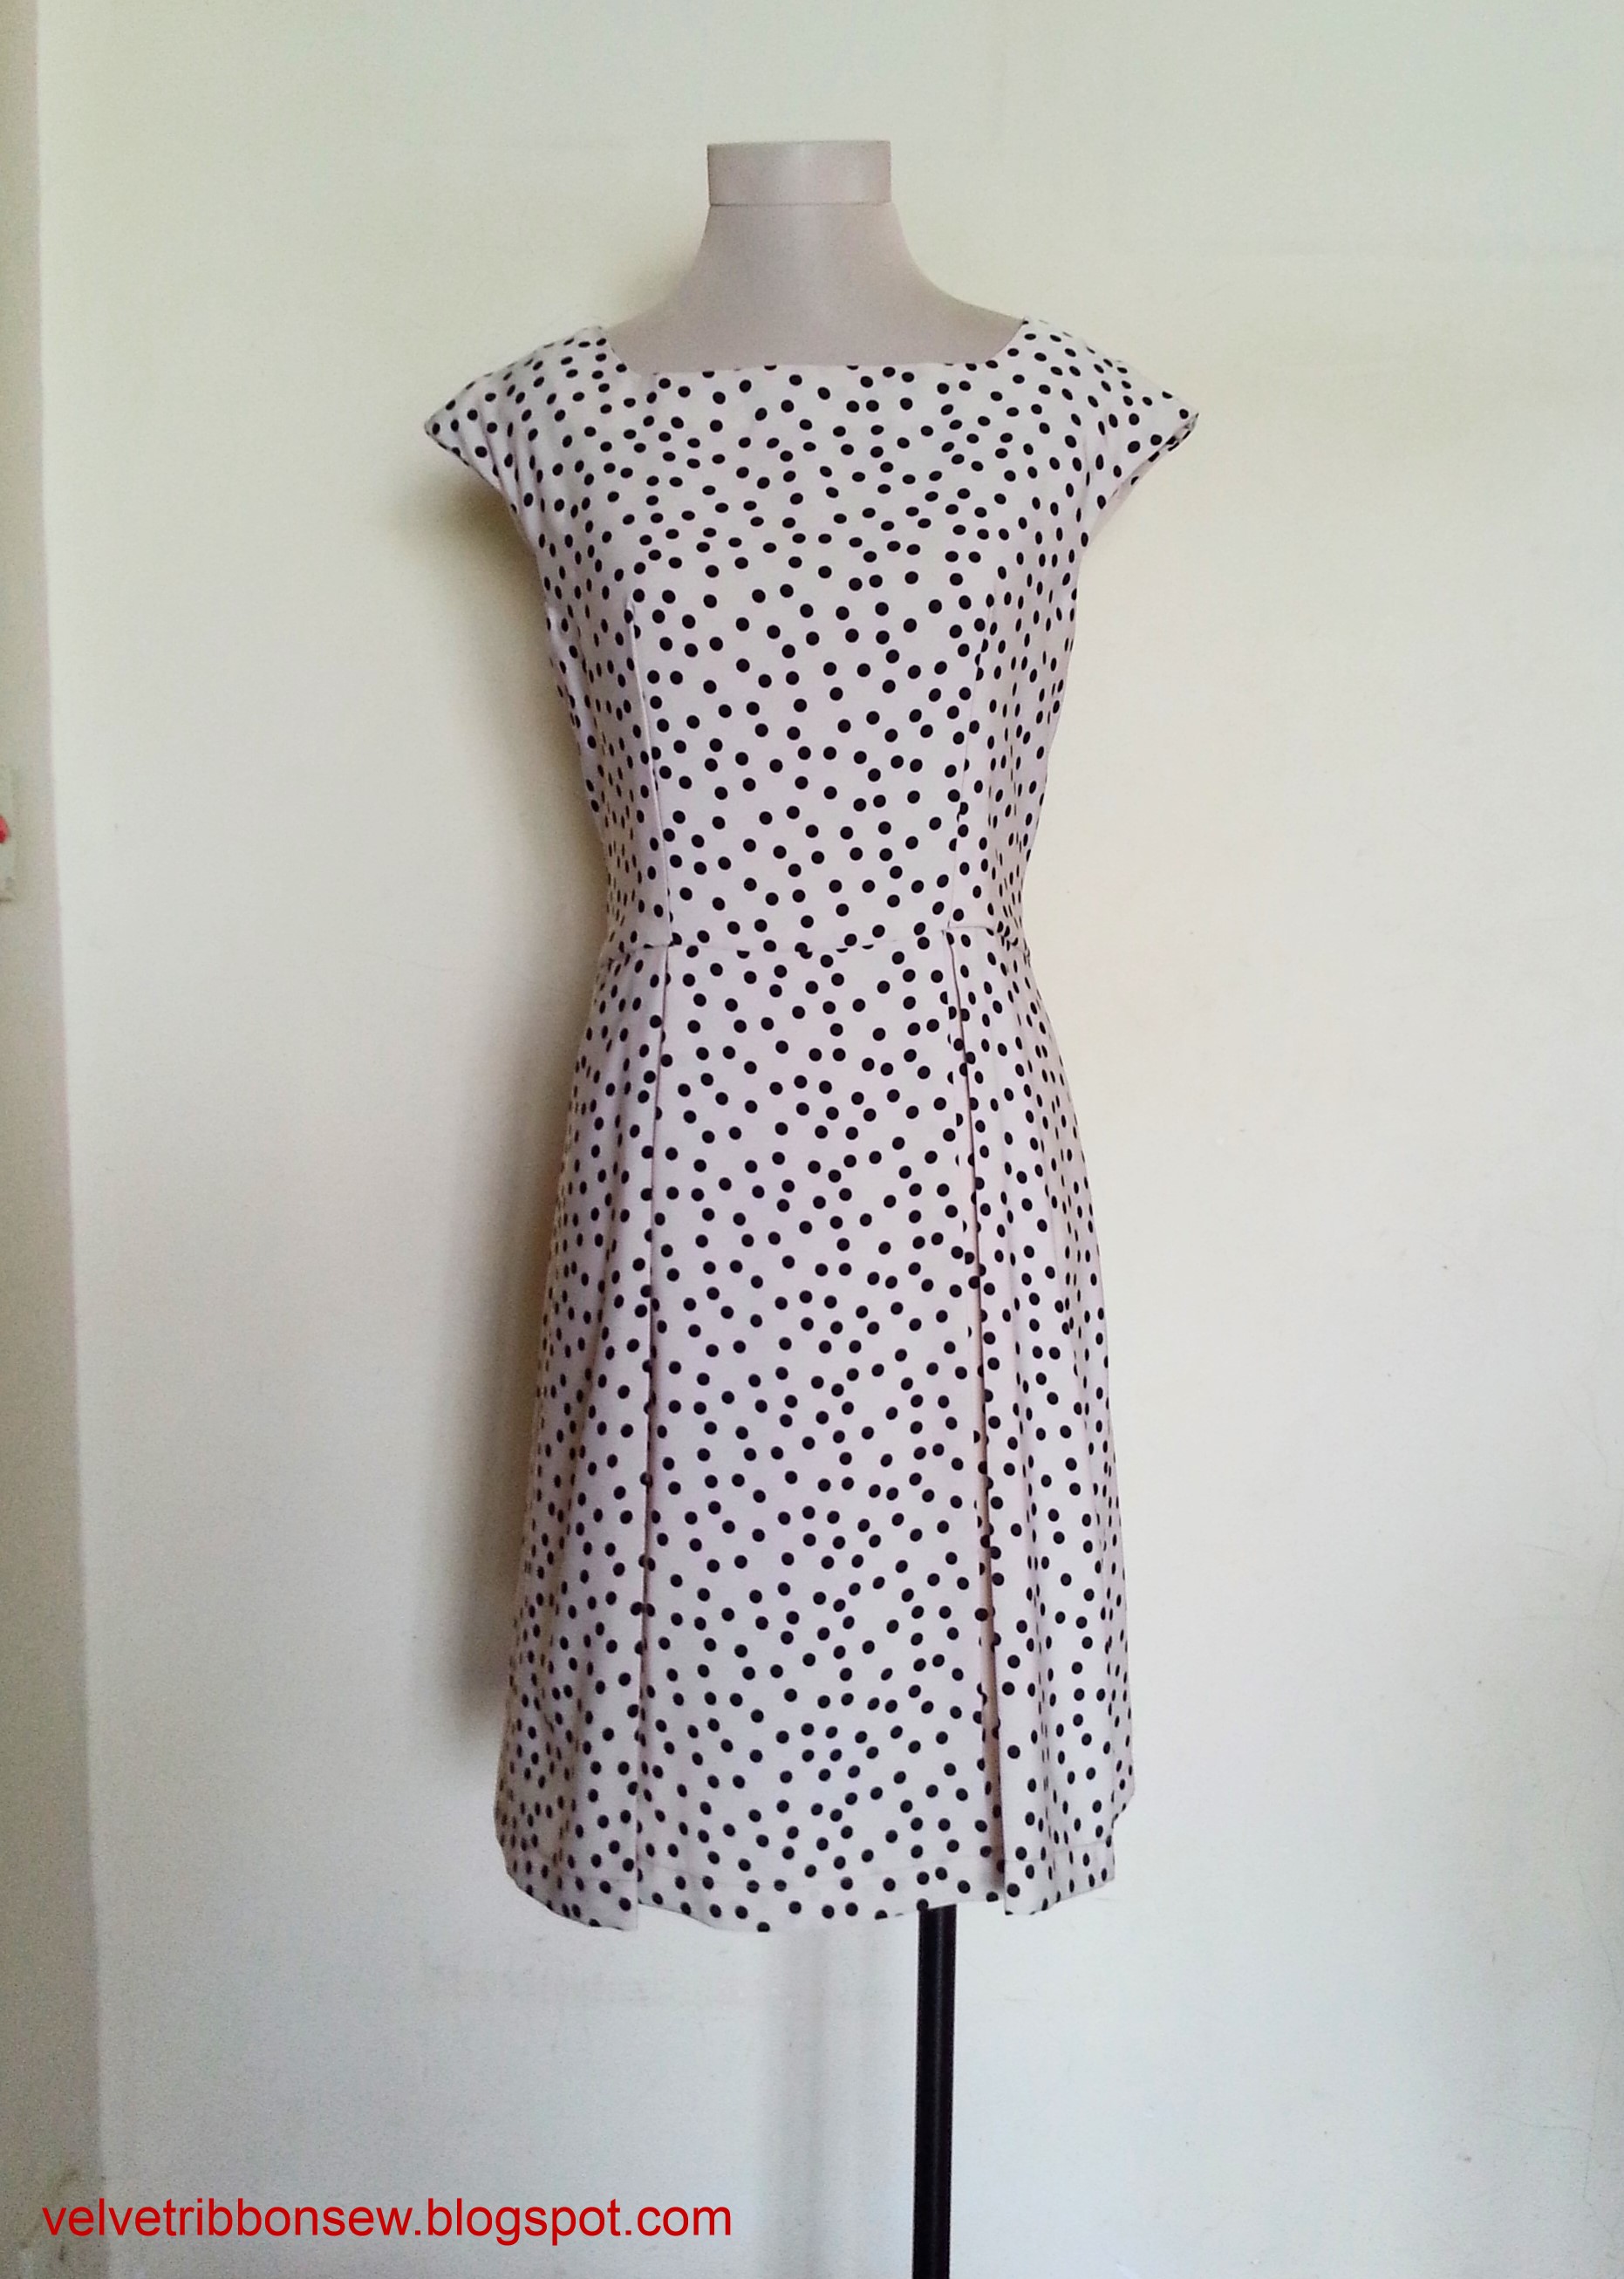 Sewing Vintage Modern Polka Dot Dress Sewing Projects